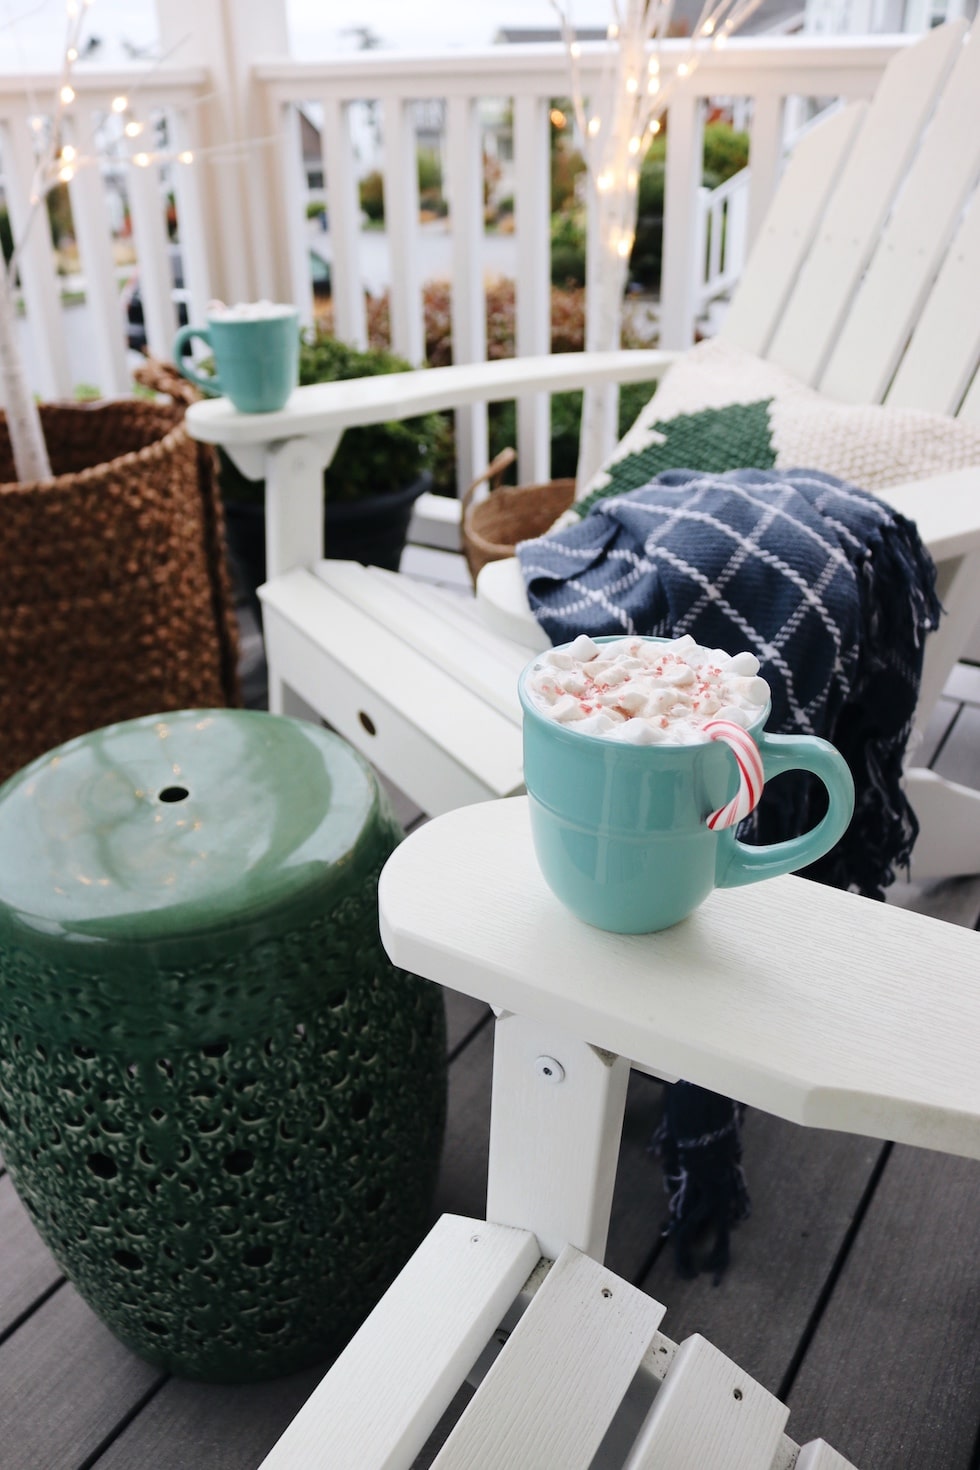 A Simple Winter Front Porch (+ My Method for Christmas Decorating that Won't Feel Overwhelming)